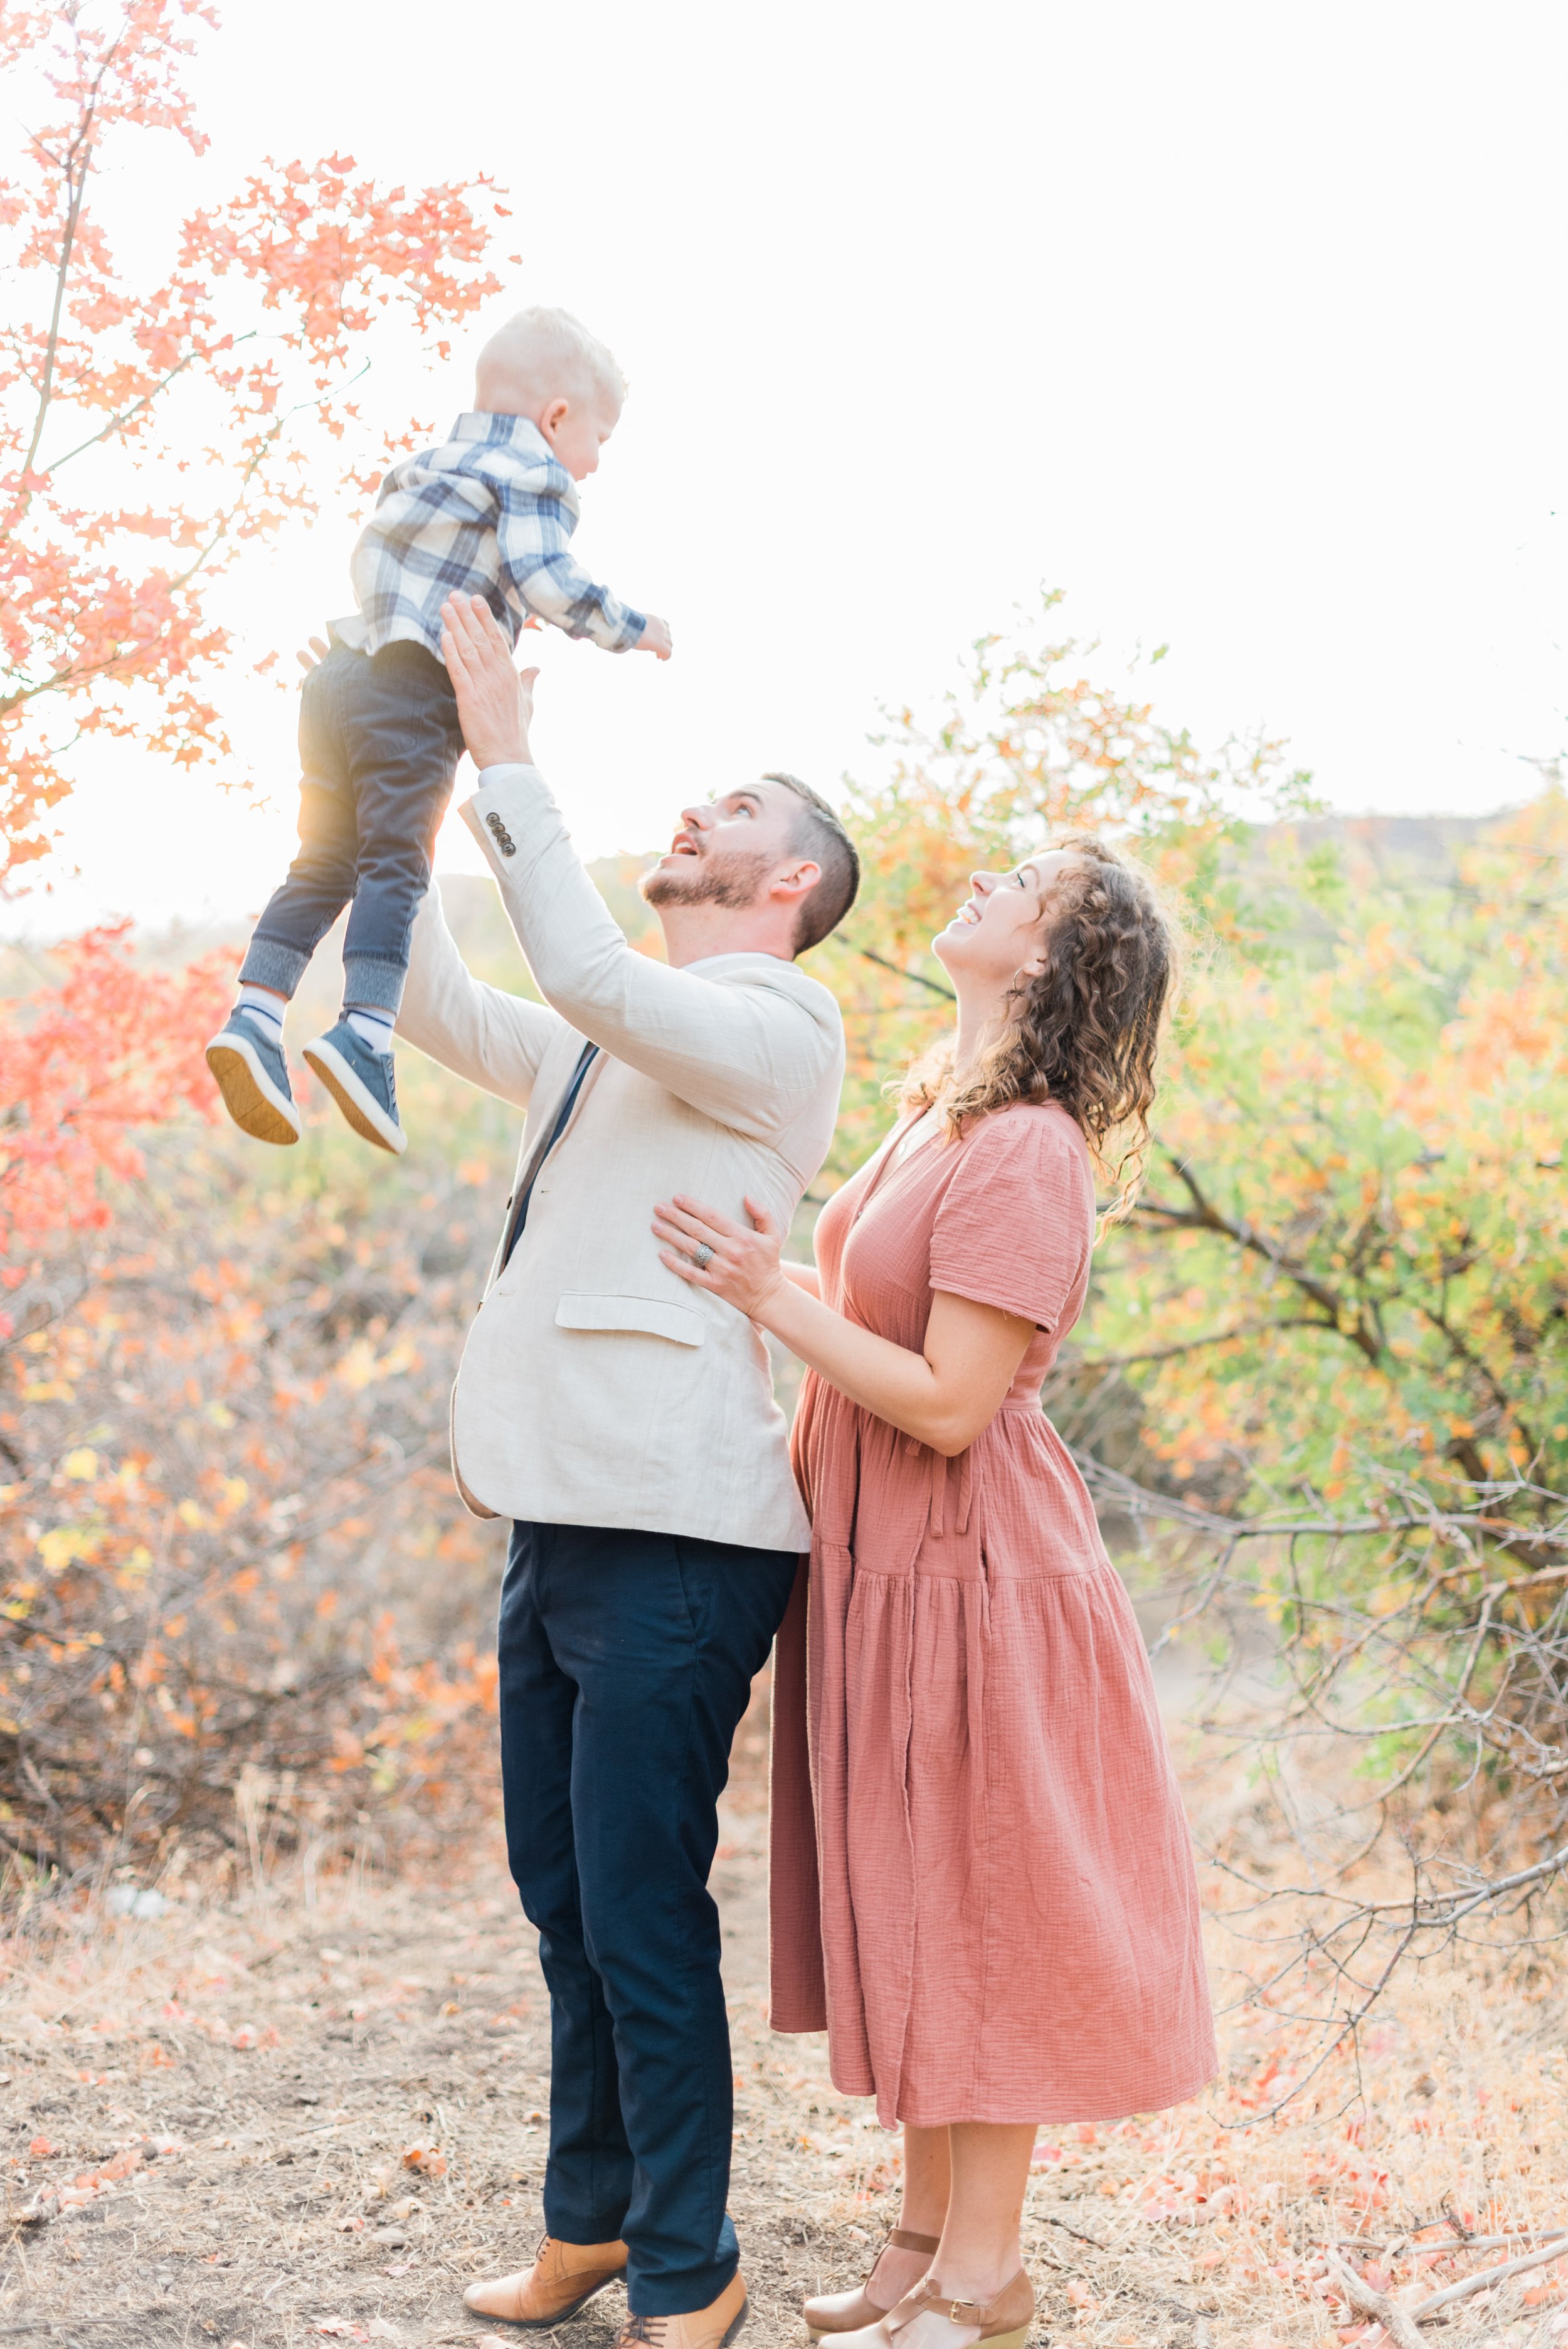  A dad throws his son up in the air with his wife behind him during a family photoshoot in the fall. Natural laughter poses personalized photoshoot #atlantafamilyphotographer #familiesofinstagram #familypics #GeorgiaFamilyPhotographer #PeachtreeFamil